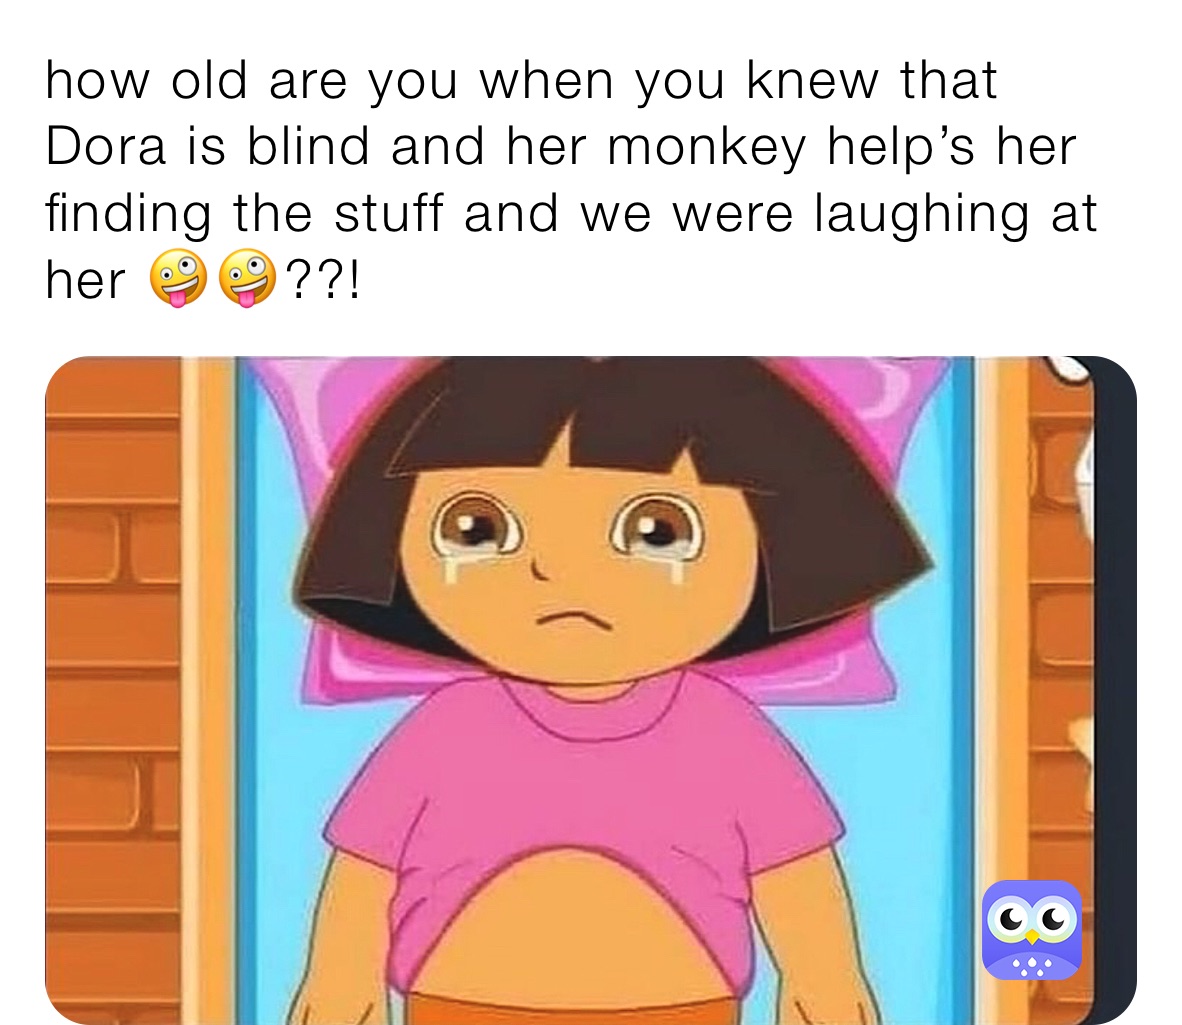 how old are you when you knew that Dora is blind and her monkey help’s her finding the stuff and we were laughing at her 🤪🤪??!